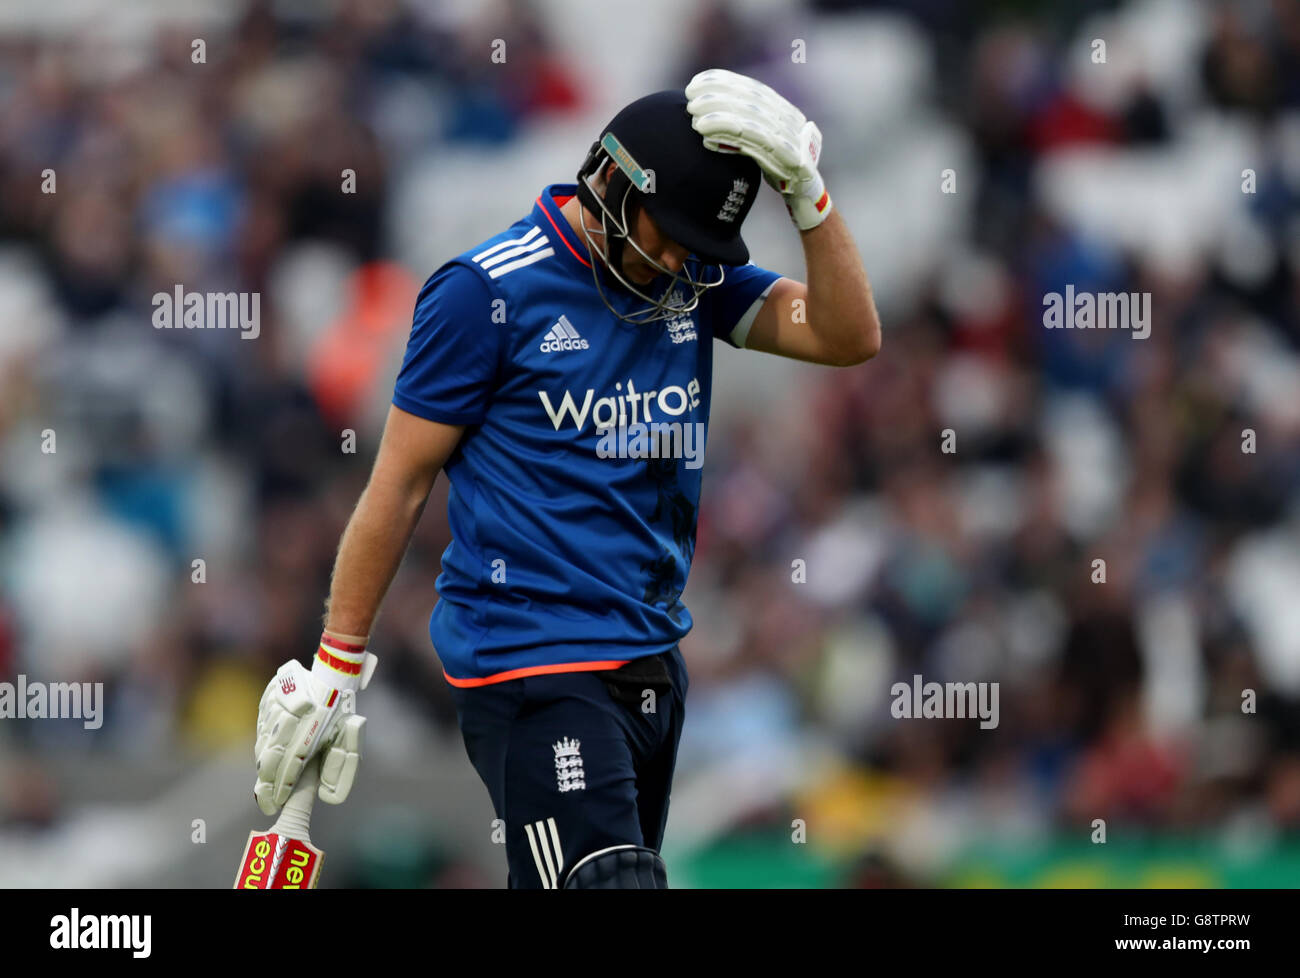 England's Joe Root reacts after being dismissed during the Royal London One Day International Series at the Kia Oval, London. Stock Photo